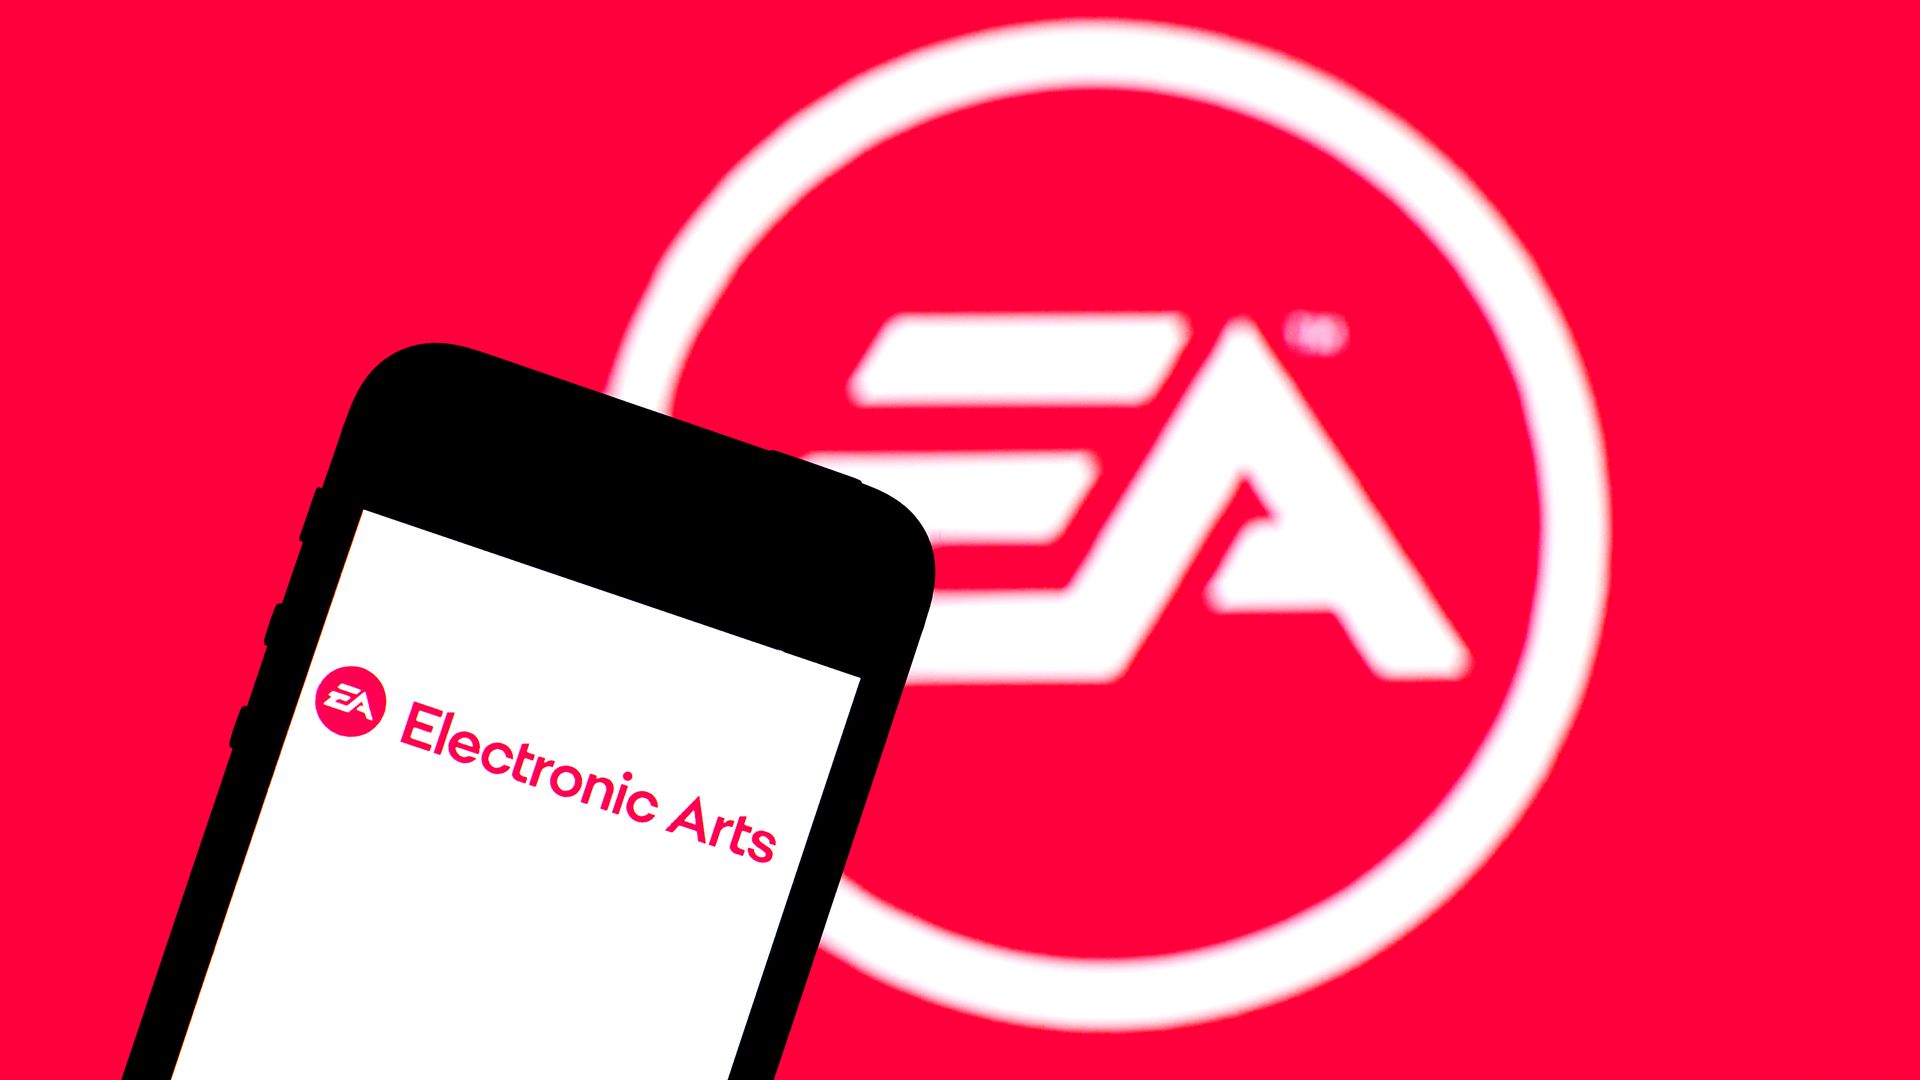 Photo of a cell phone and the logo for Electronic Arts